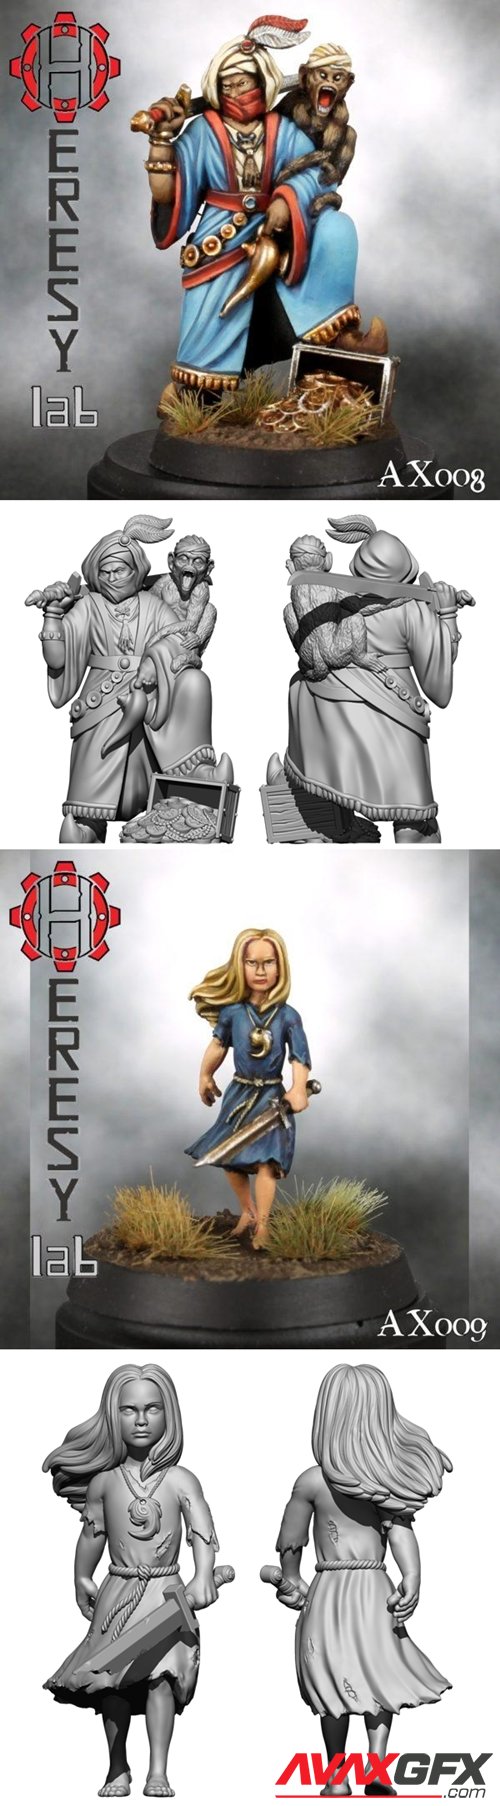 AX008 Taqui el Agha and AX009 Johanna – Citizens of the Old World – 3D Printable STL